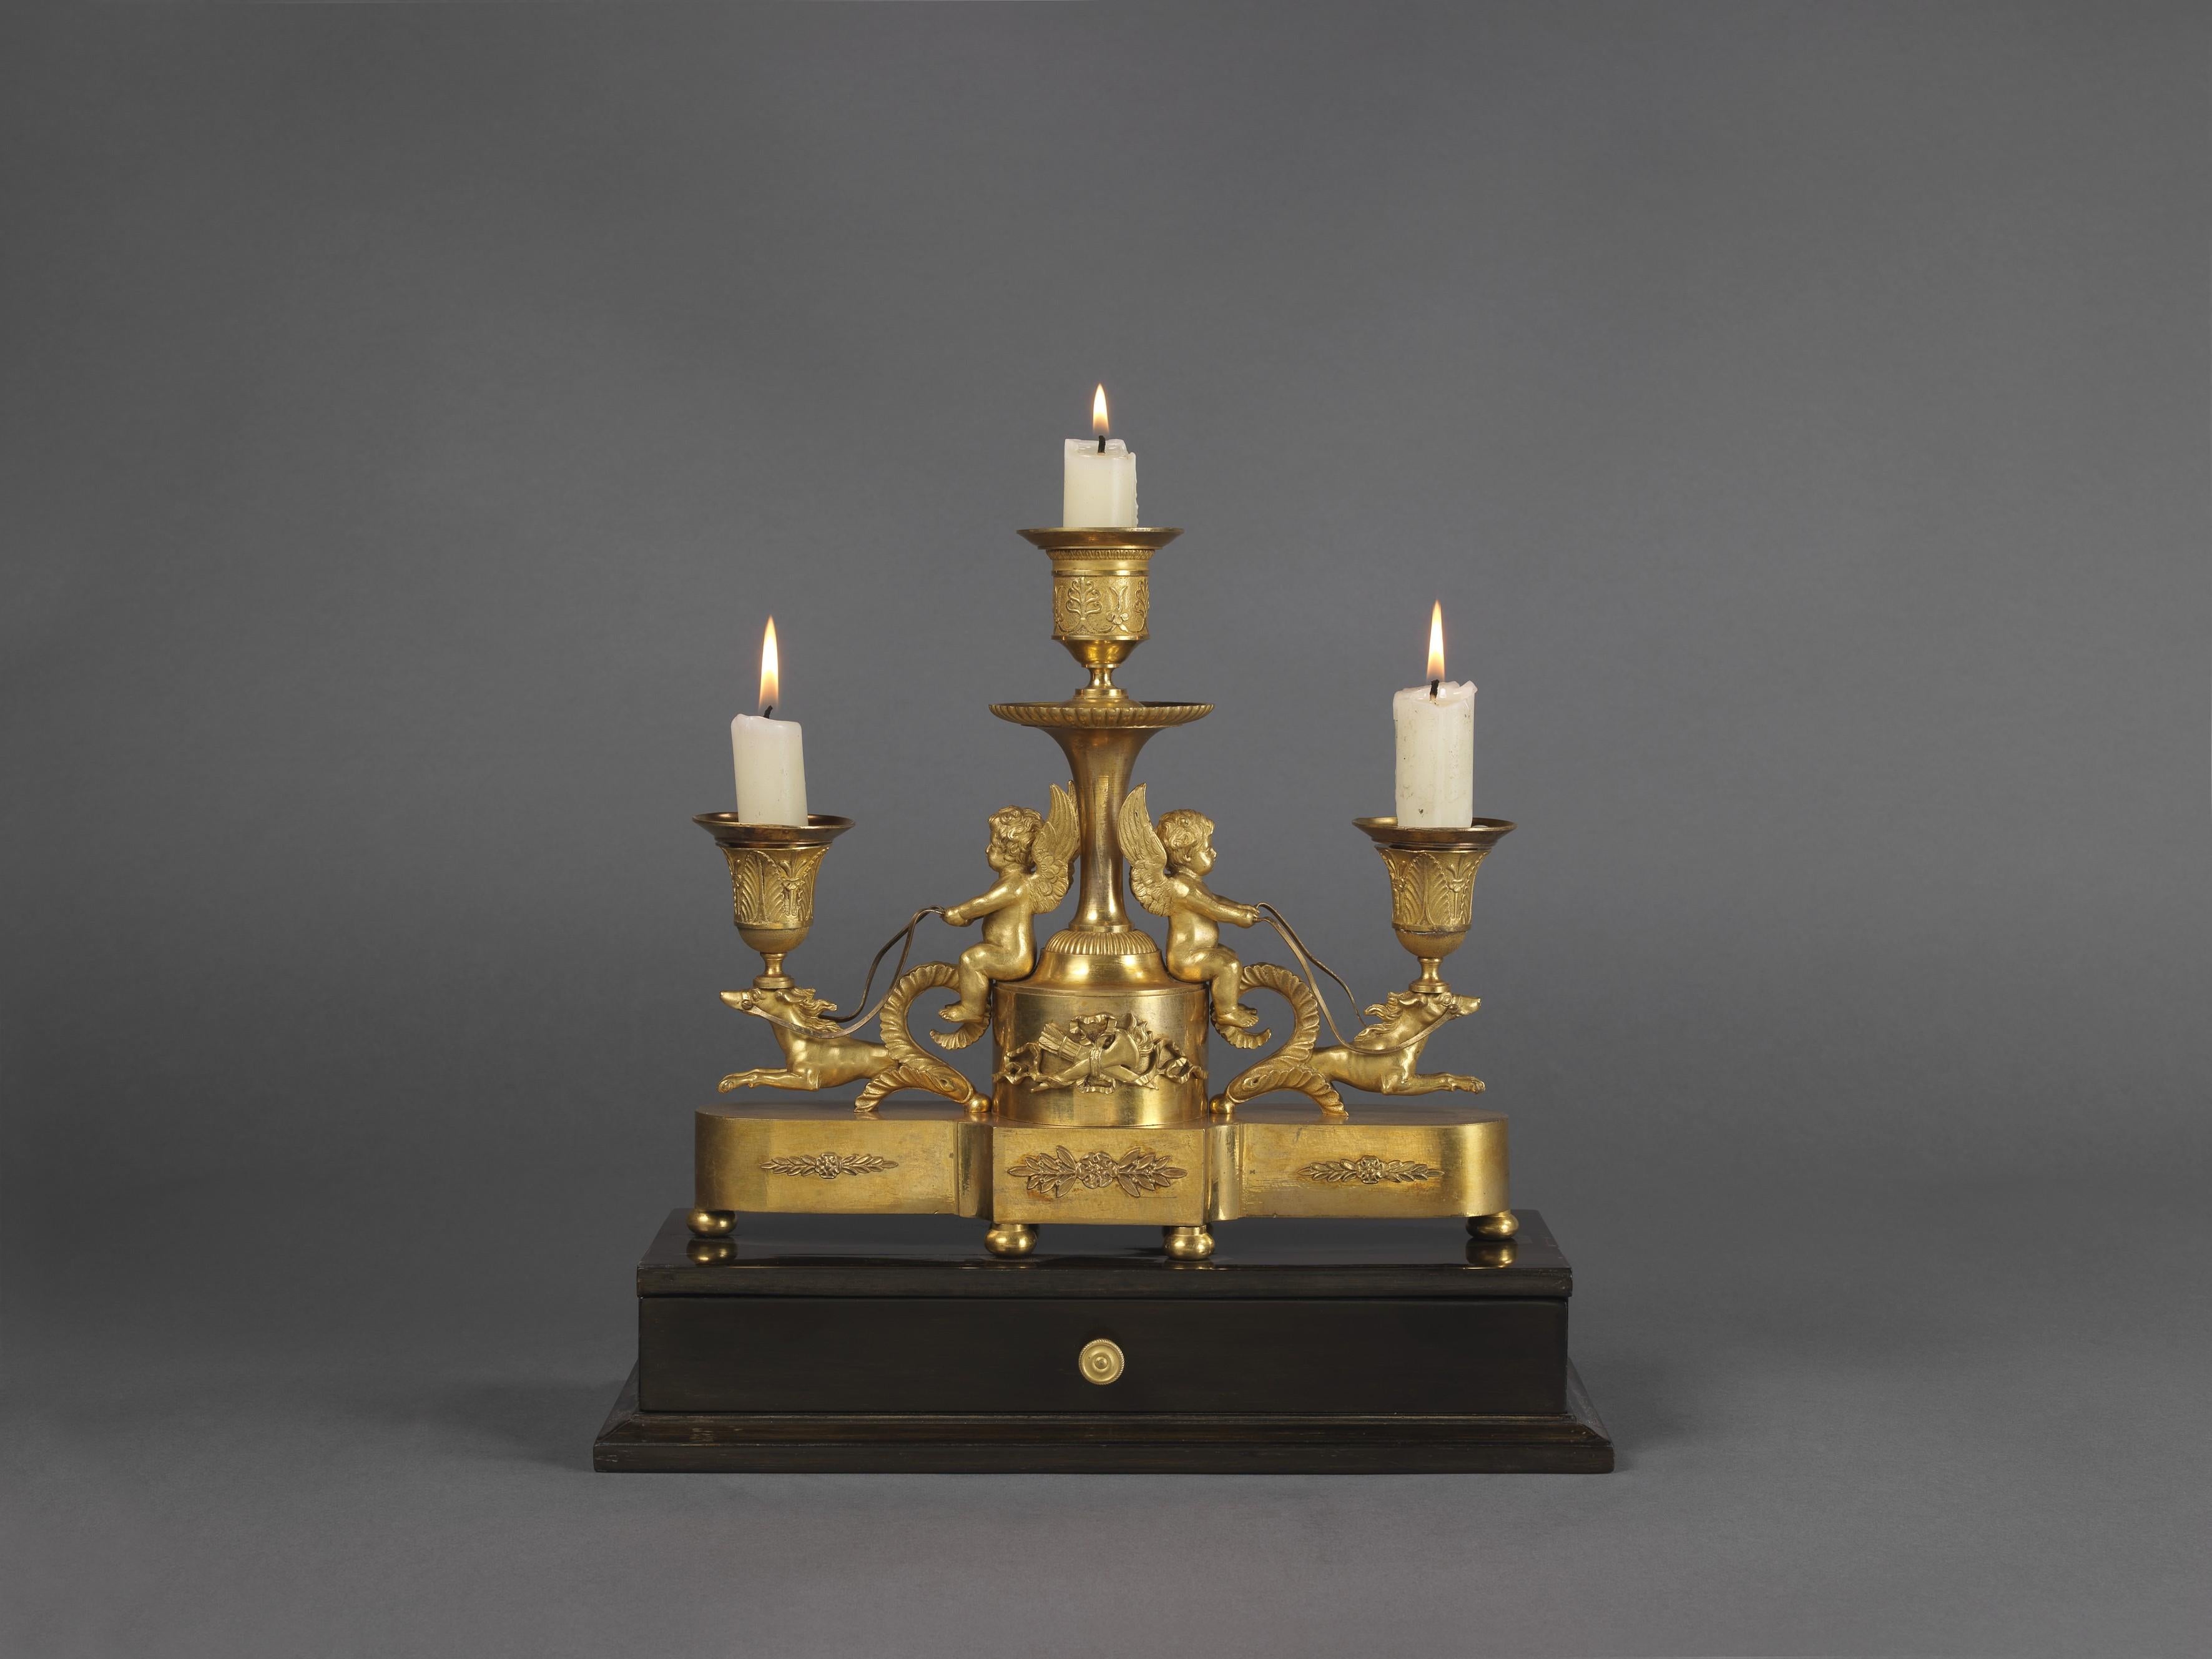 A fine Louis XVI style gilt bronze and ebony three-light desk stand.

French, circa 1820. 

This elegant desk stand has an ebonized rectangular base with drawer, supporting a re-entrant gilt-bronze plinth with ball feet. The plinth supports a